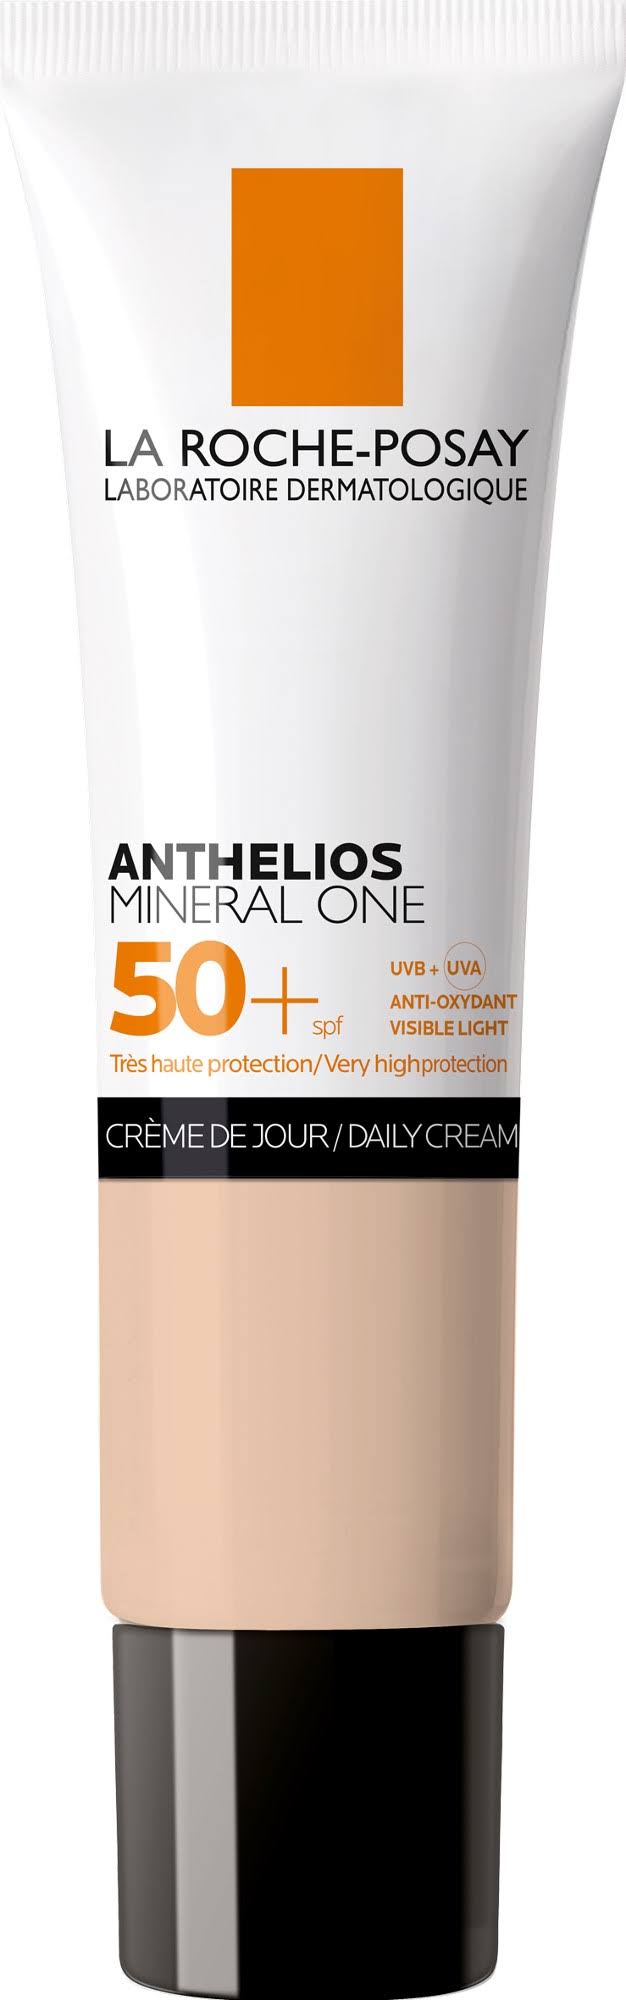 La Roche Posay Anthelios Mineral One Spf50+ Light 30ml